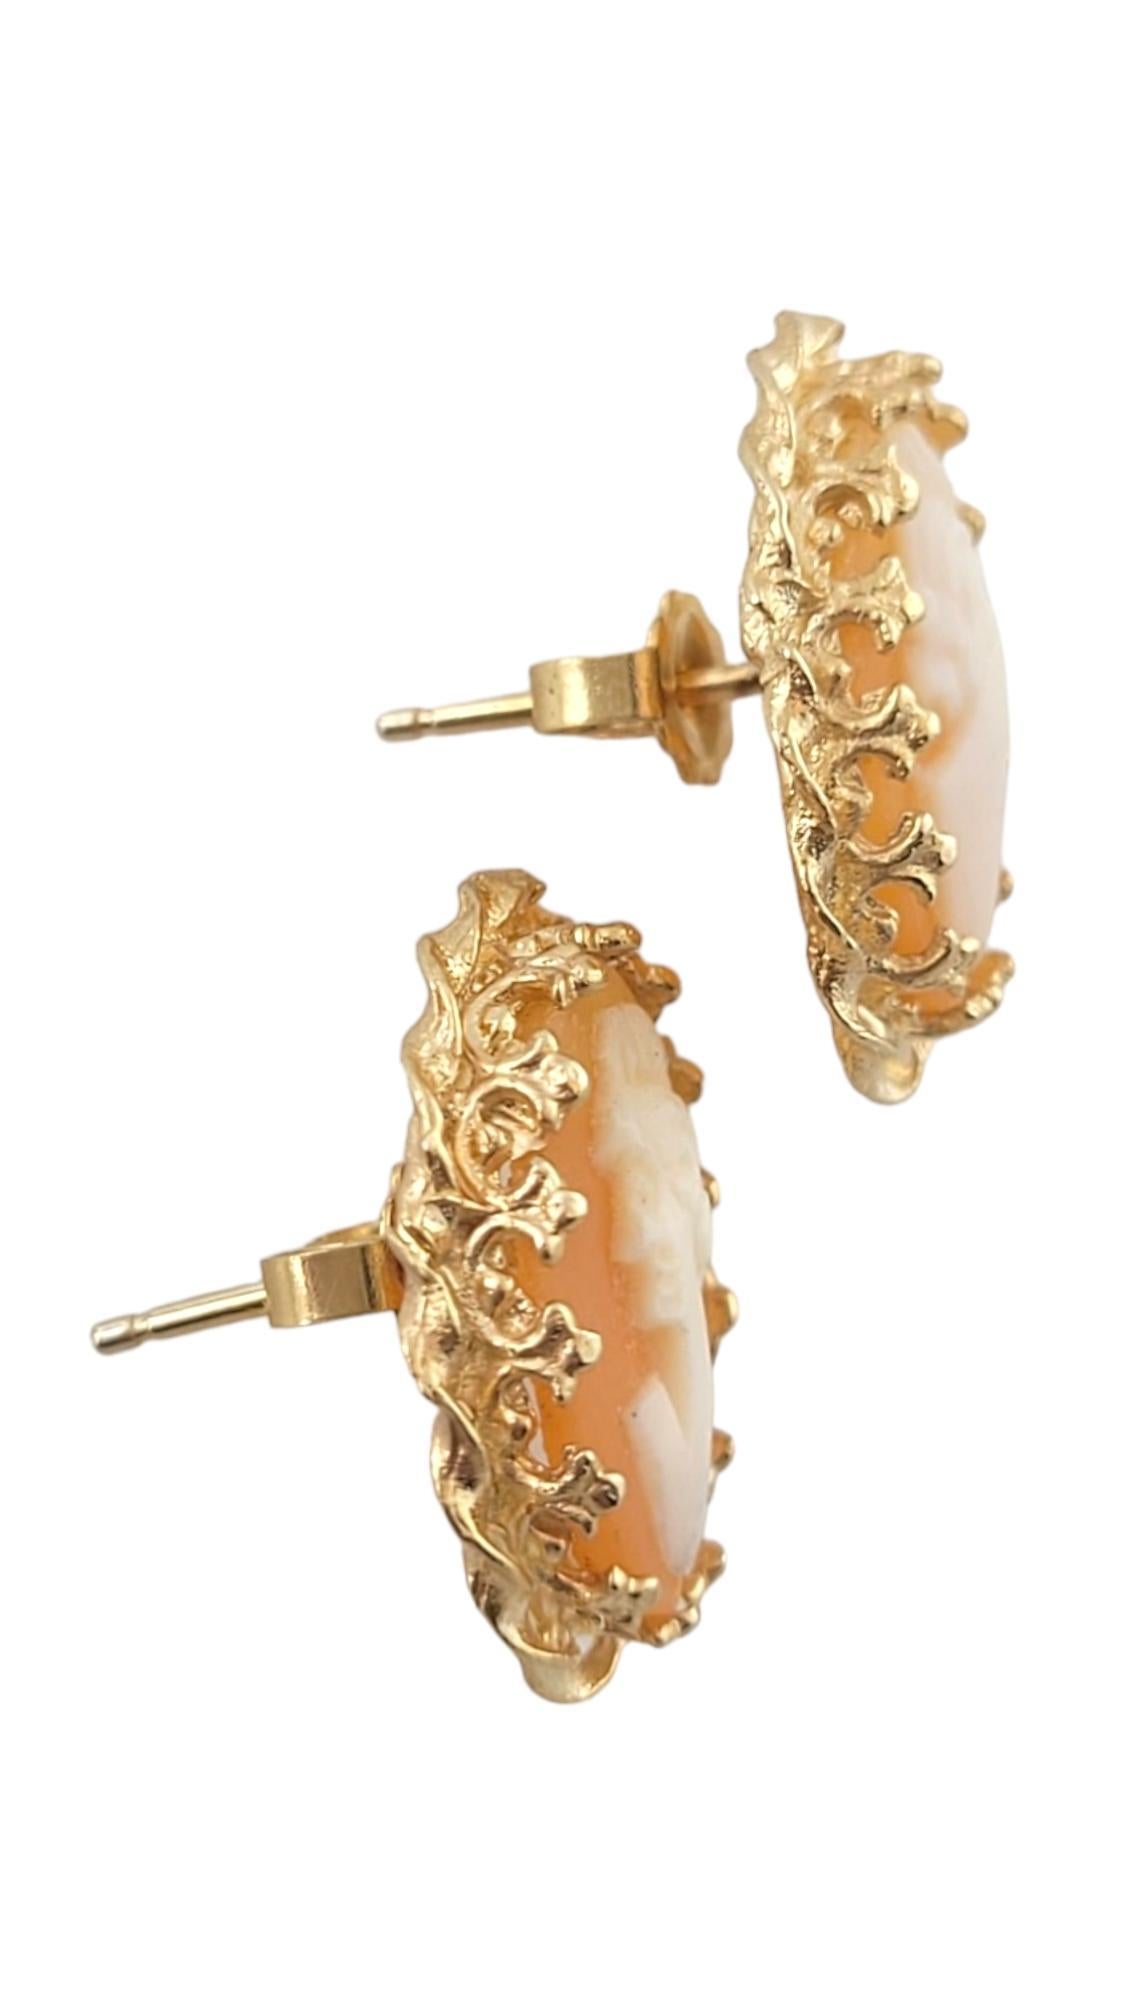 14K Yellow Gold Cameo Earrings

This gorgeous set of cameo stud earrings are meticulously crafted from 14K yellow gold!

Size: 17.6mm X 13.9mm X 4.13mm

Weight: 2.66 dwt/ 4.13 g

Hallmark: 14K

Very good condition, professionally polished.

Will